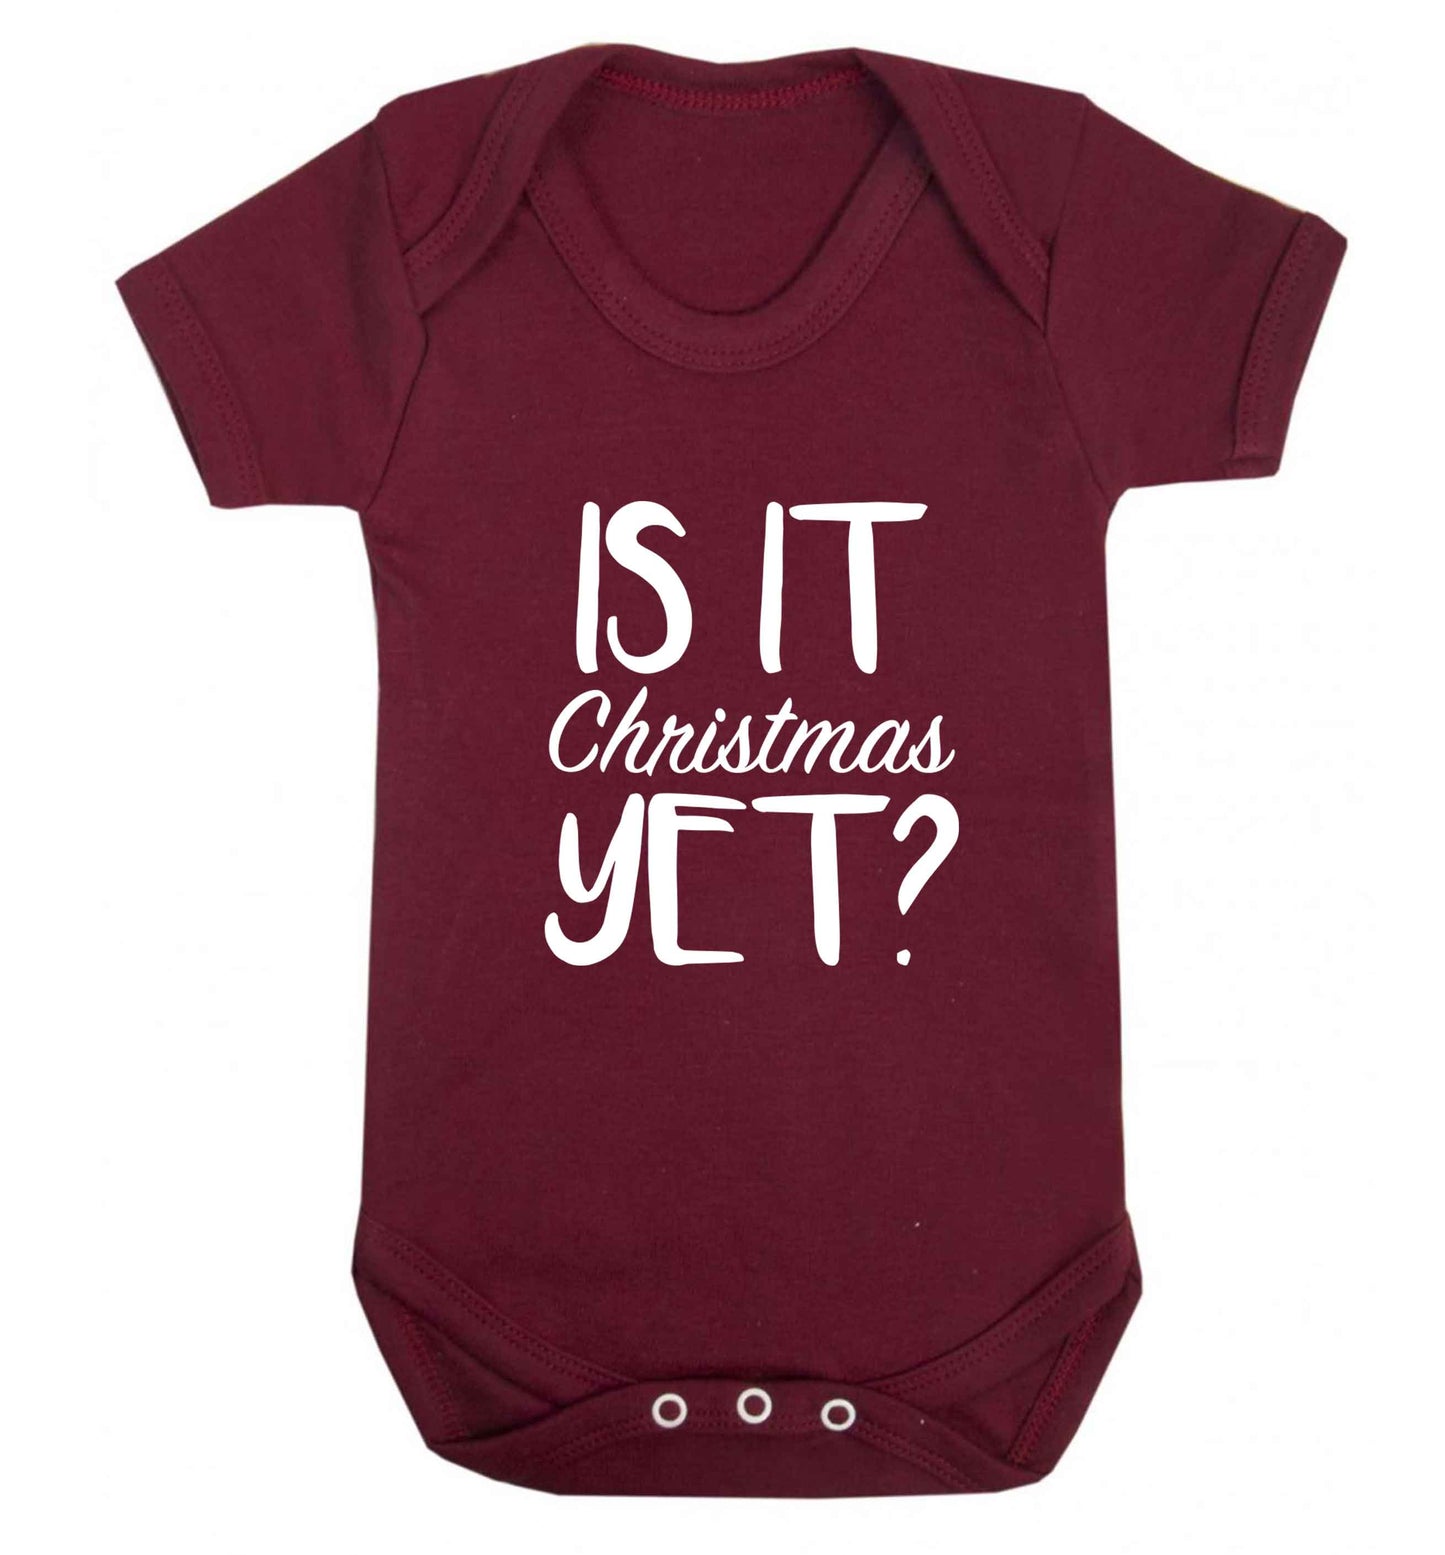 Is it Christmas yet? baby vest maroon 18-24 months